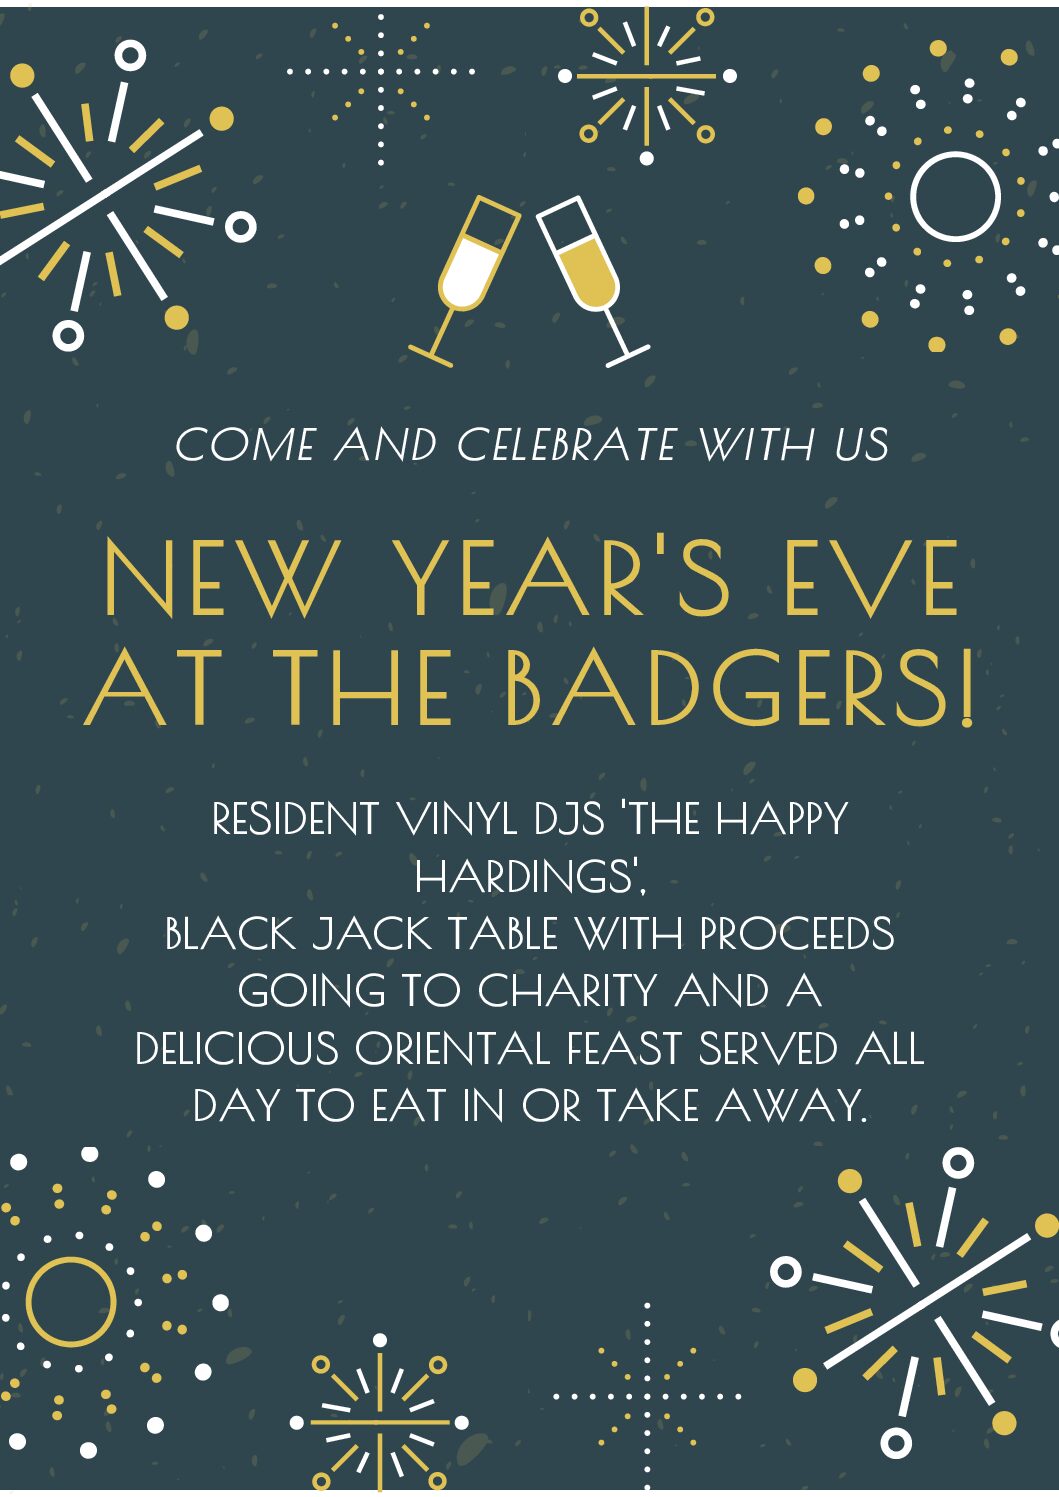 New Year’s Eve at the Badgers 2021!